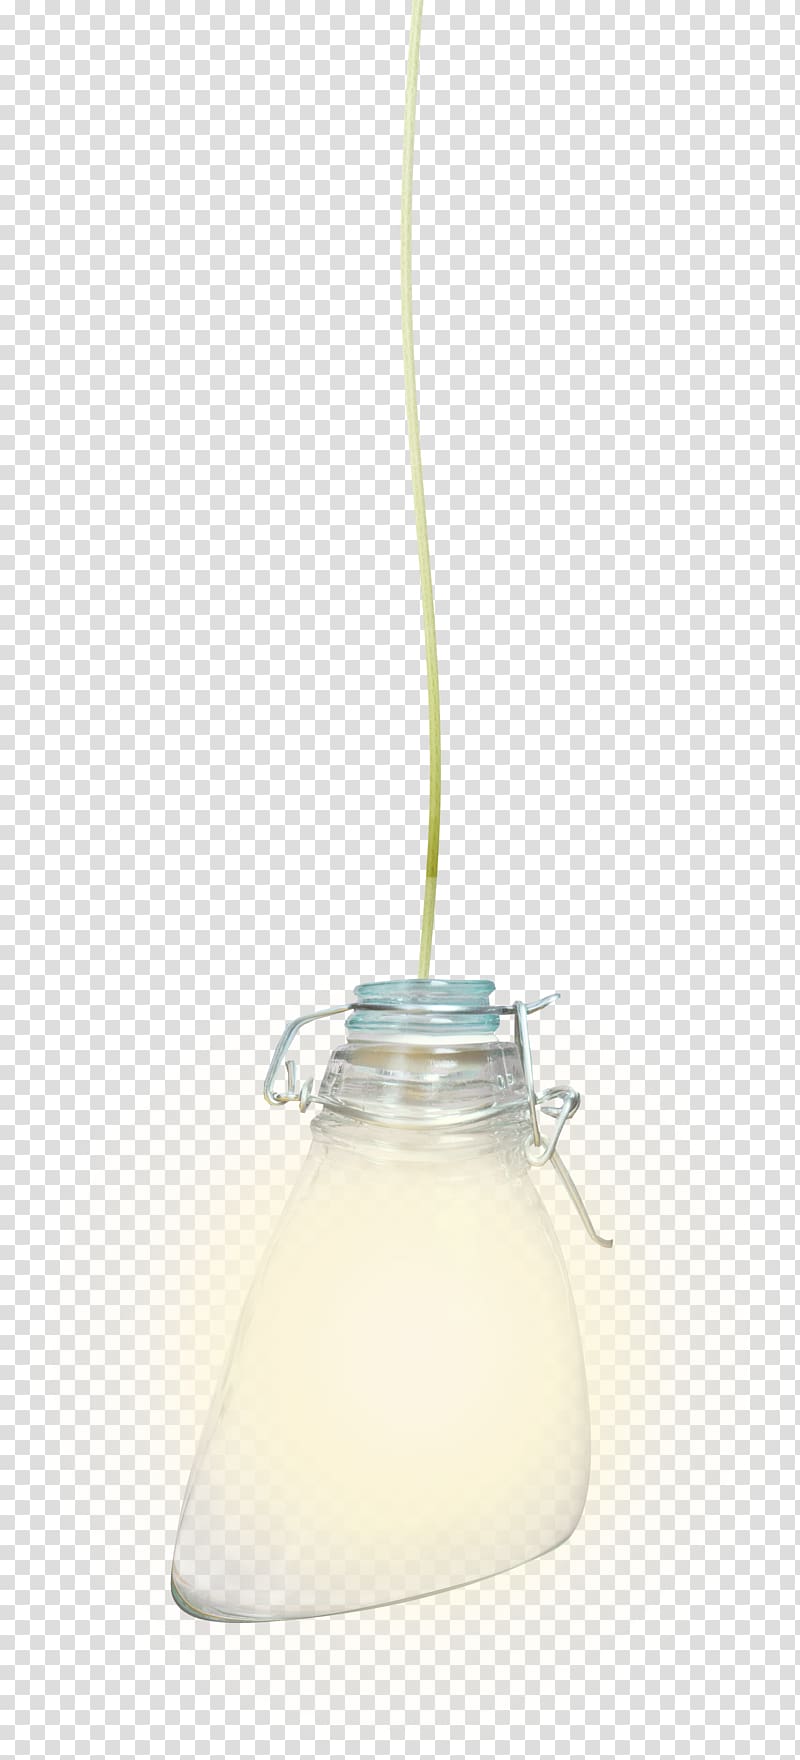 Table-glass Yellow, White bottle transparent background PNG clipart